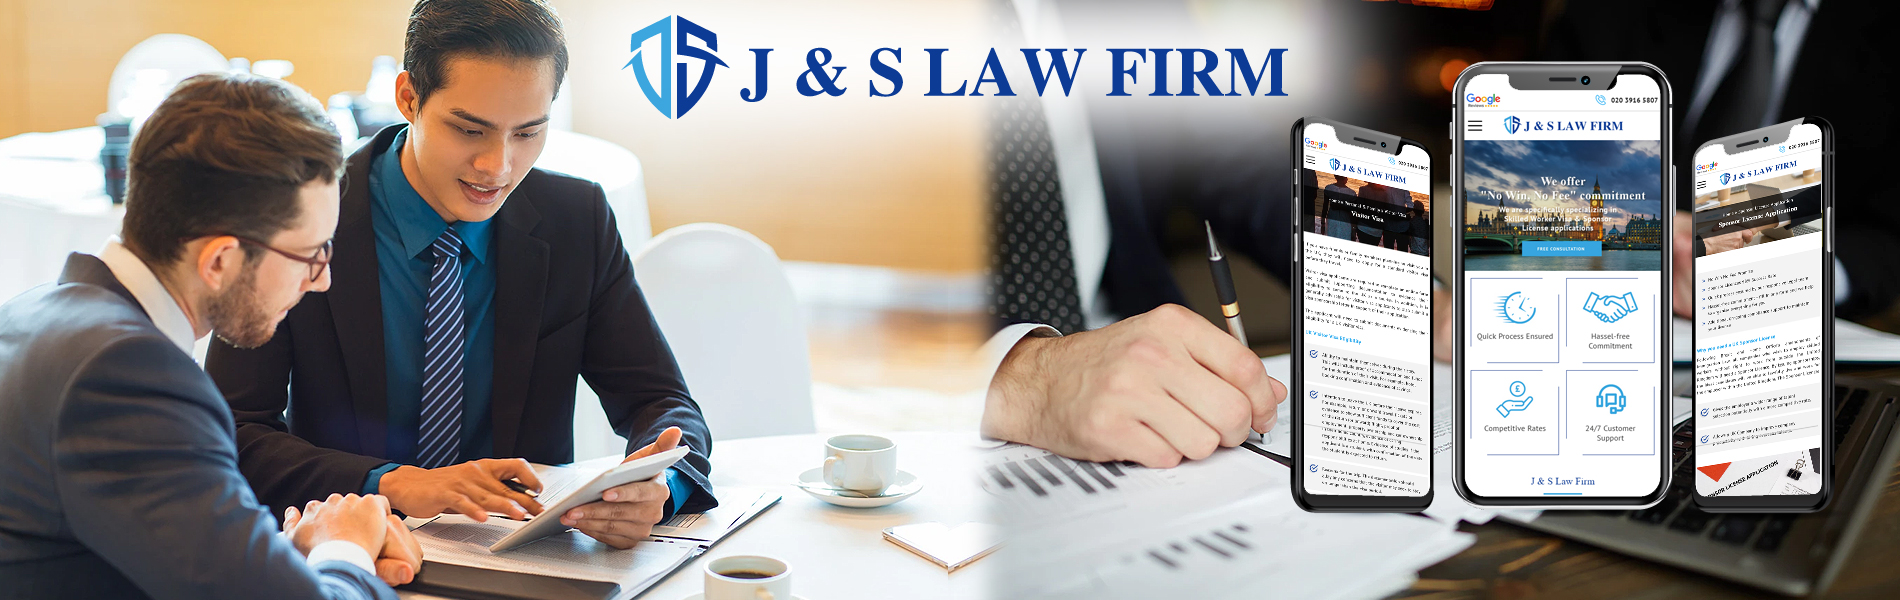 J & S Law Firm